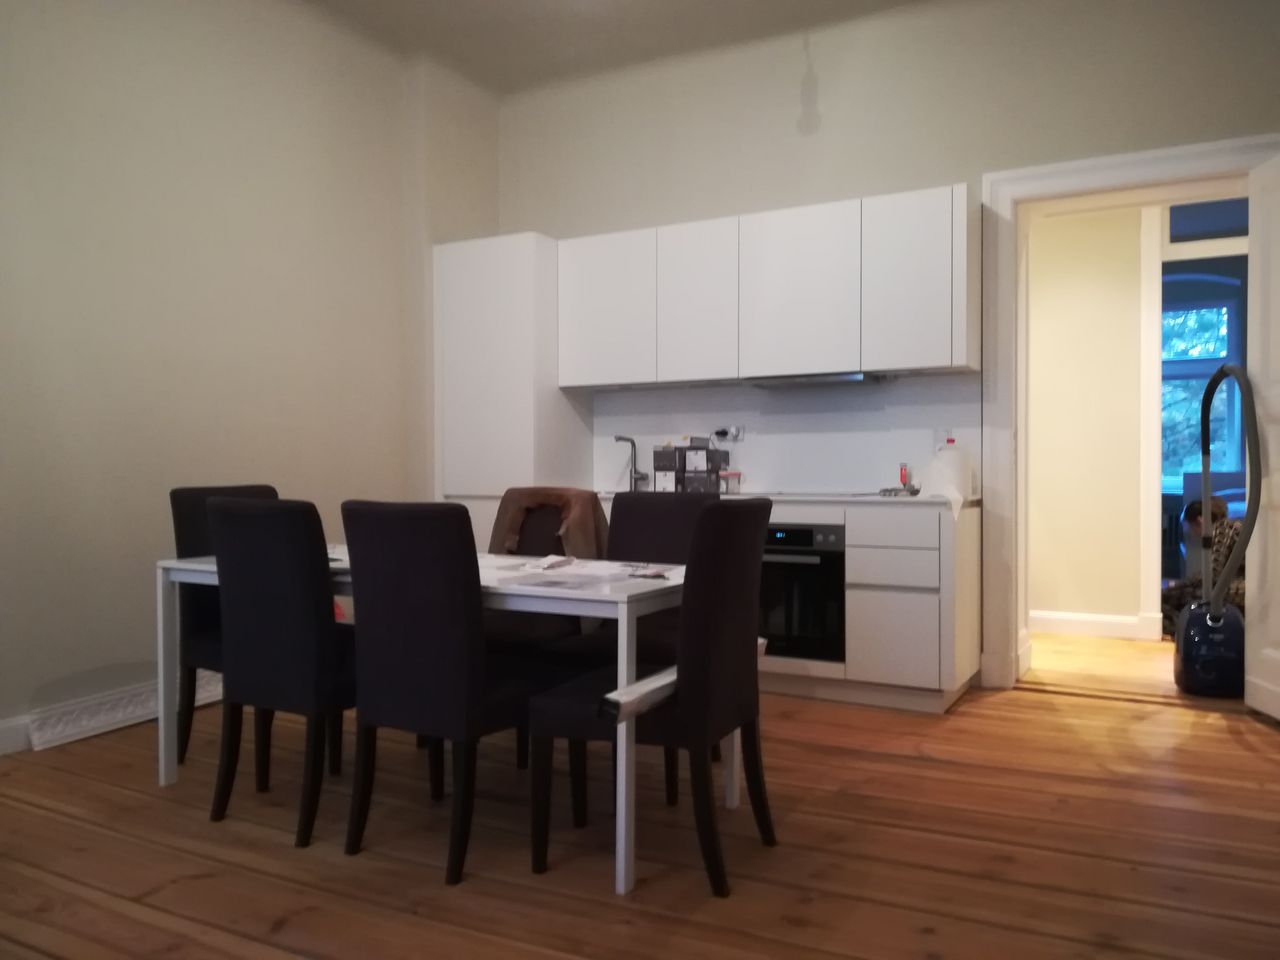 Just refurbished luxury 70 sqm two bathrooms, two bedrooms flat located in Charlottenburg, Berlin